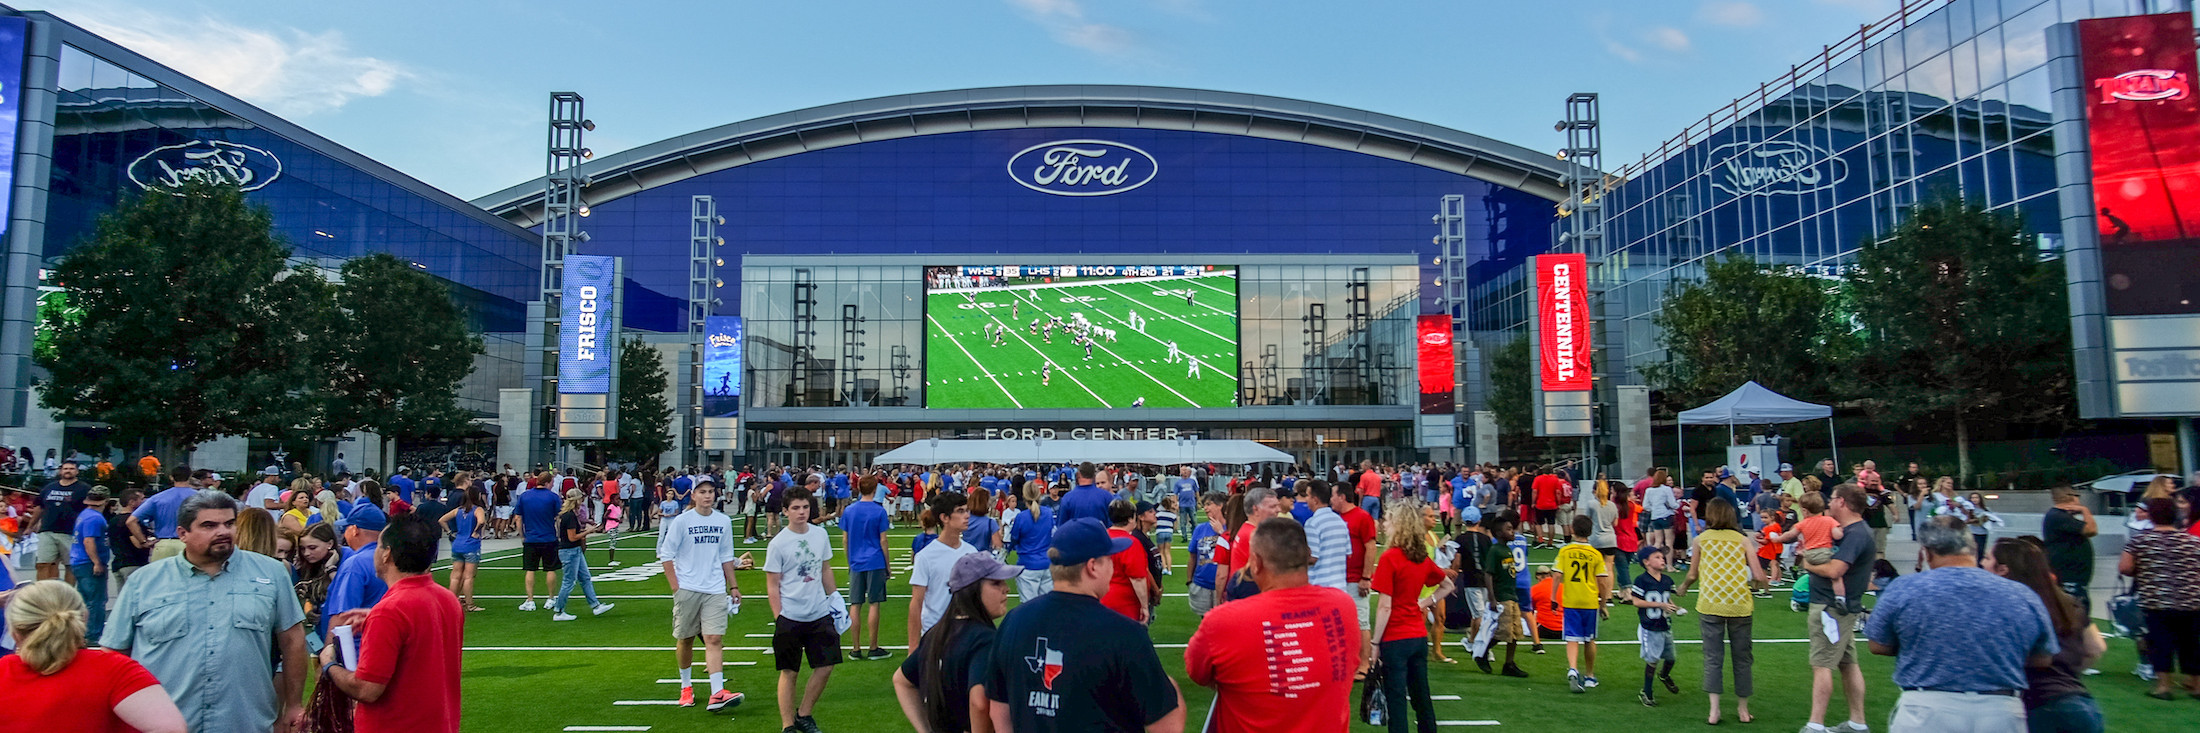 People gather on Tostito's Plaza in front of Ford Center at The Star. There is a football game shown on the large screen on the building.